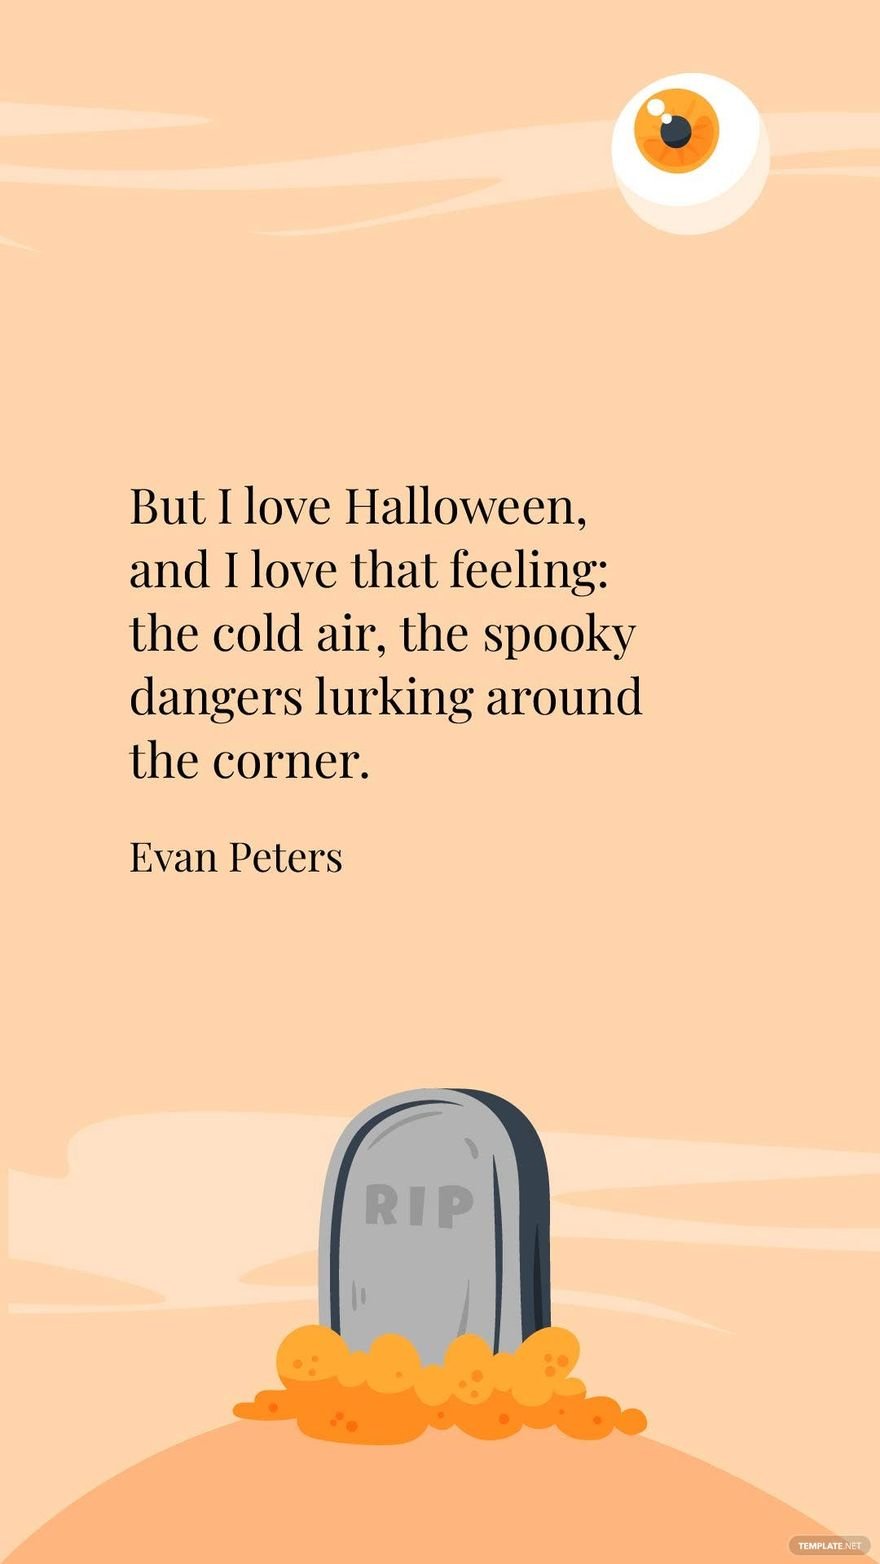 Evan Peters- But I love Halloween, and I love that feeling: the cold air, the spooky dangers lurking around the corner. 